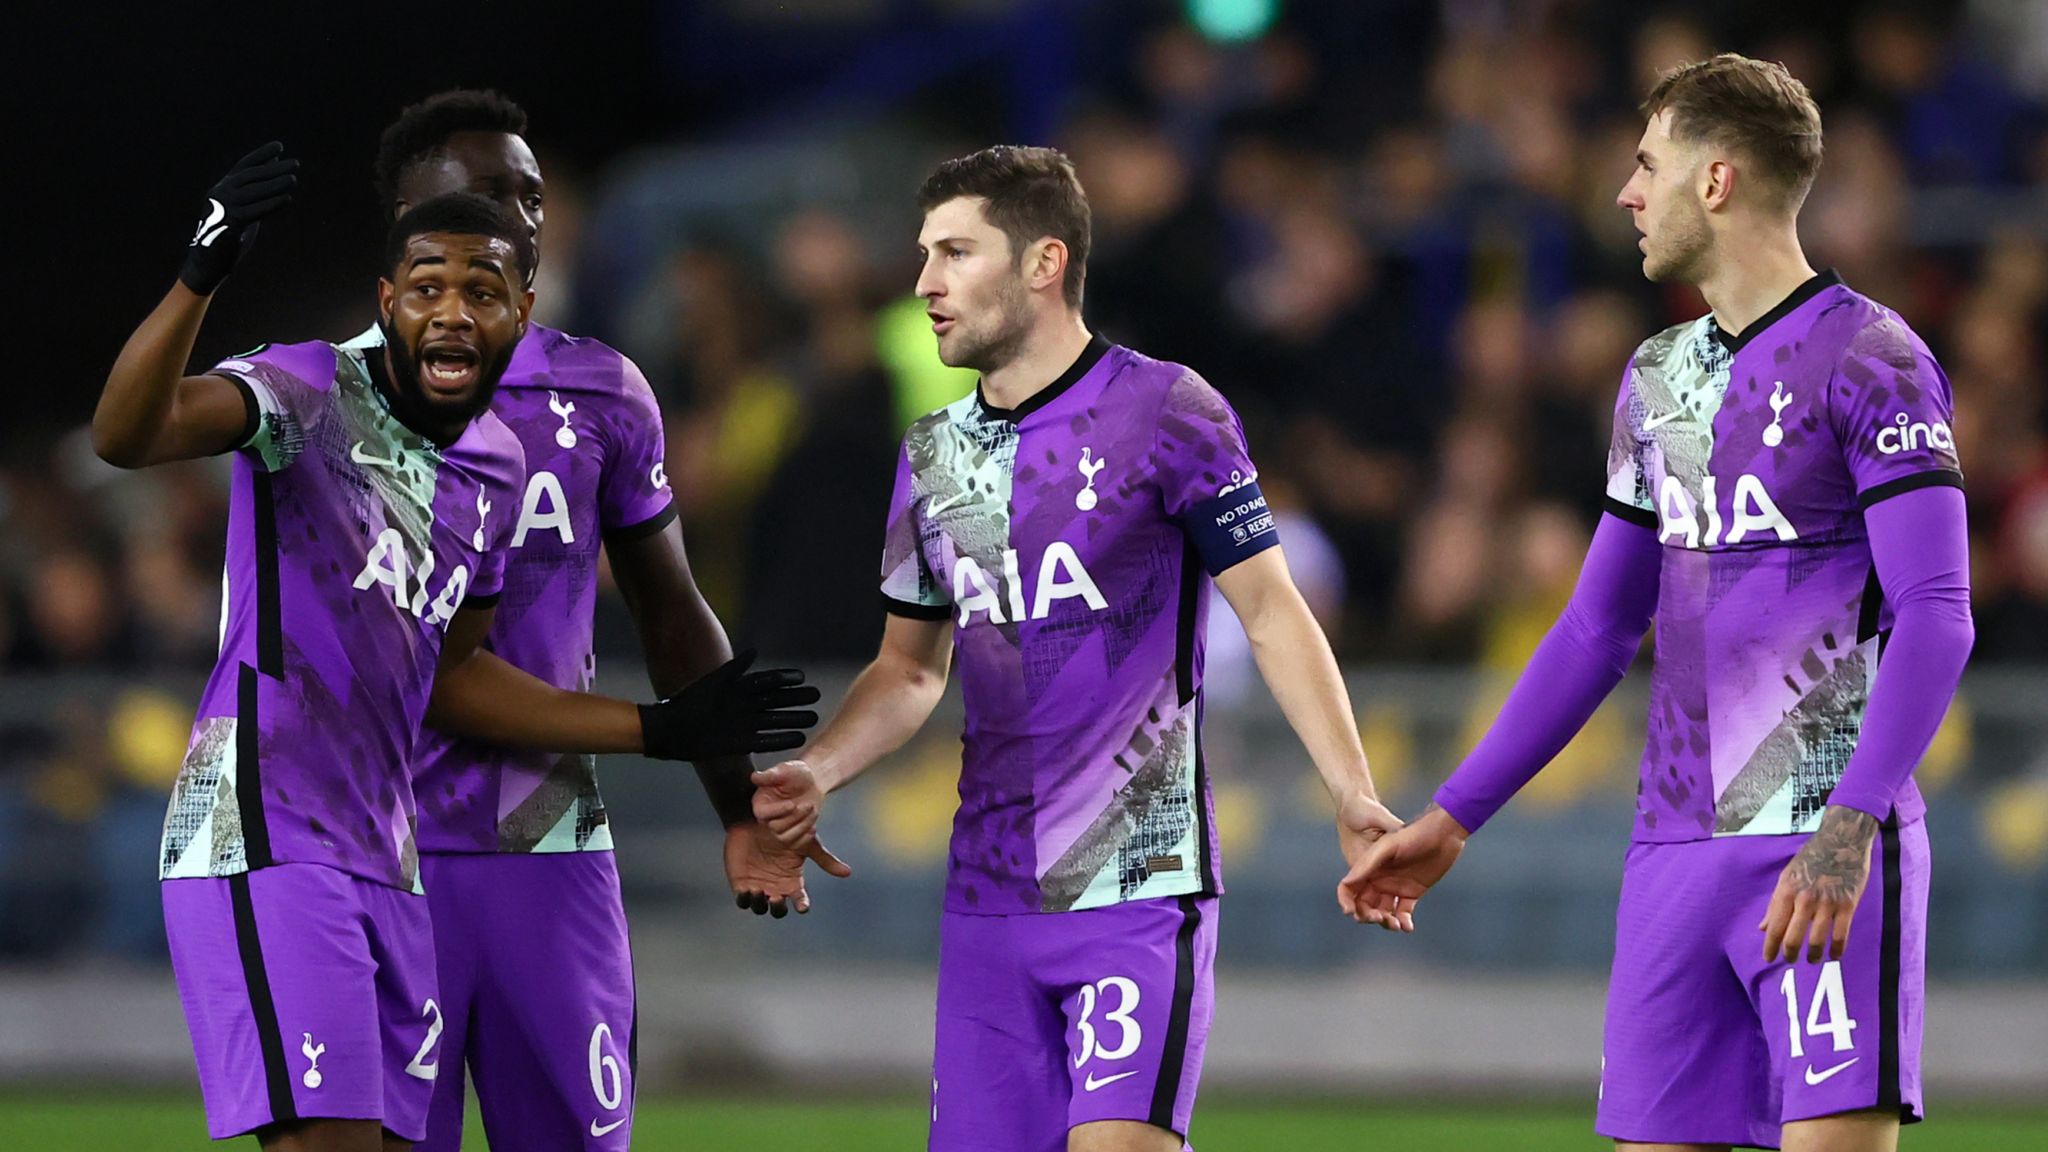 We bring you the Tottenham predicted lineup vs Manchester United, Team News, and Prediction from this gameweek 10 clash of the 2021/22 Premier League season.